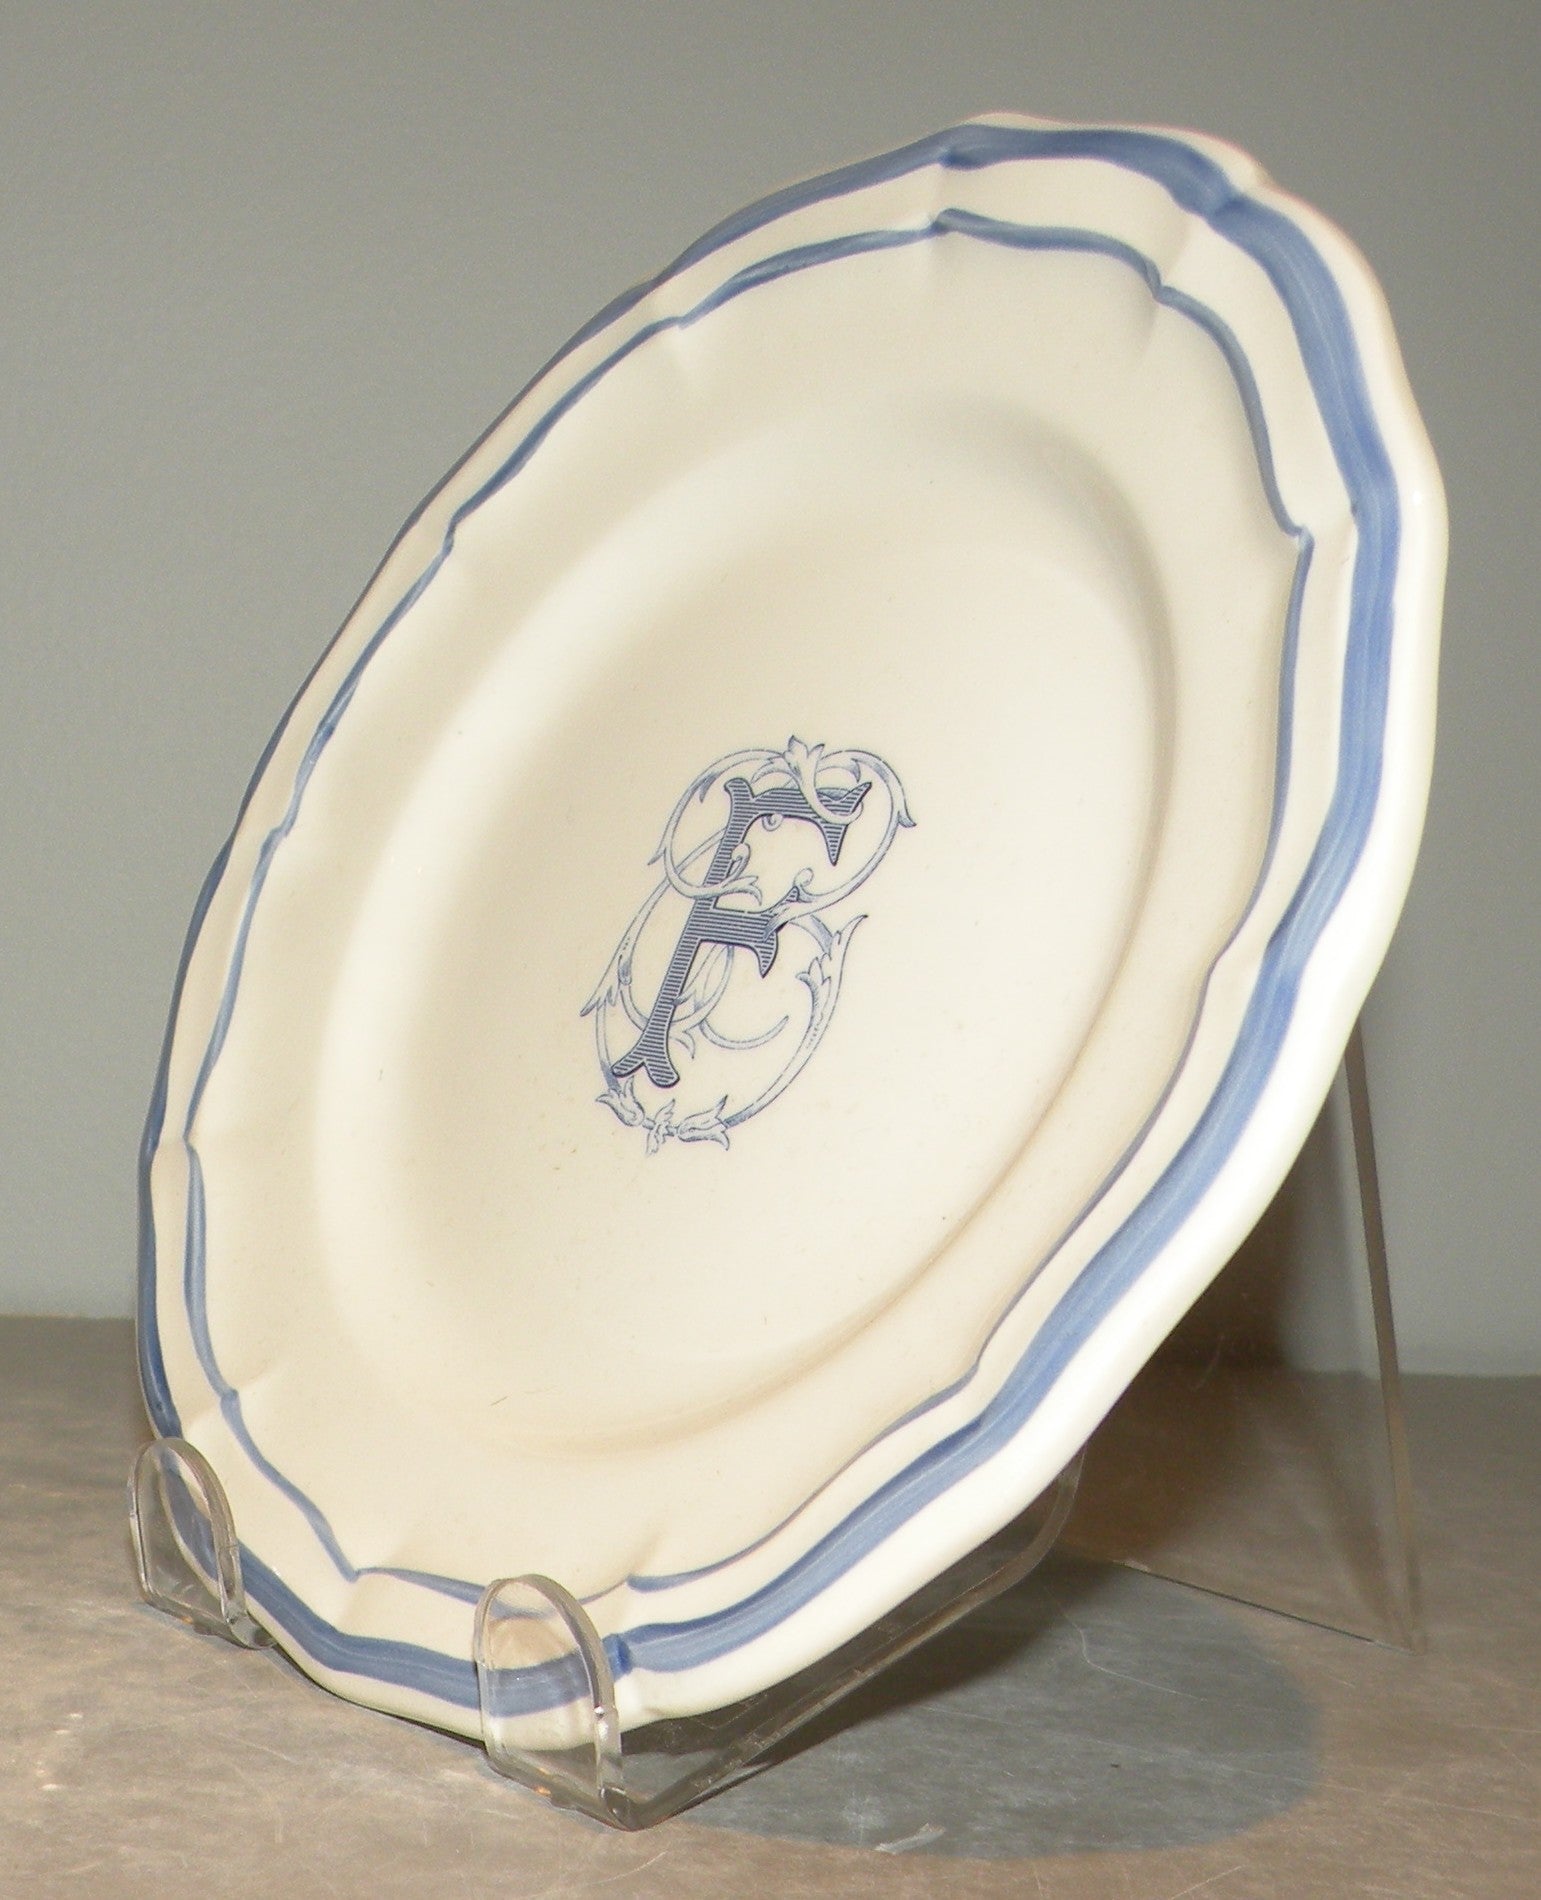 Bread & Butter Plate with the letter F , Filet Bleu Monogramme